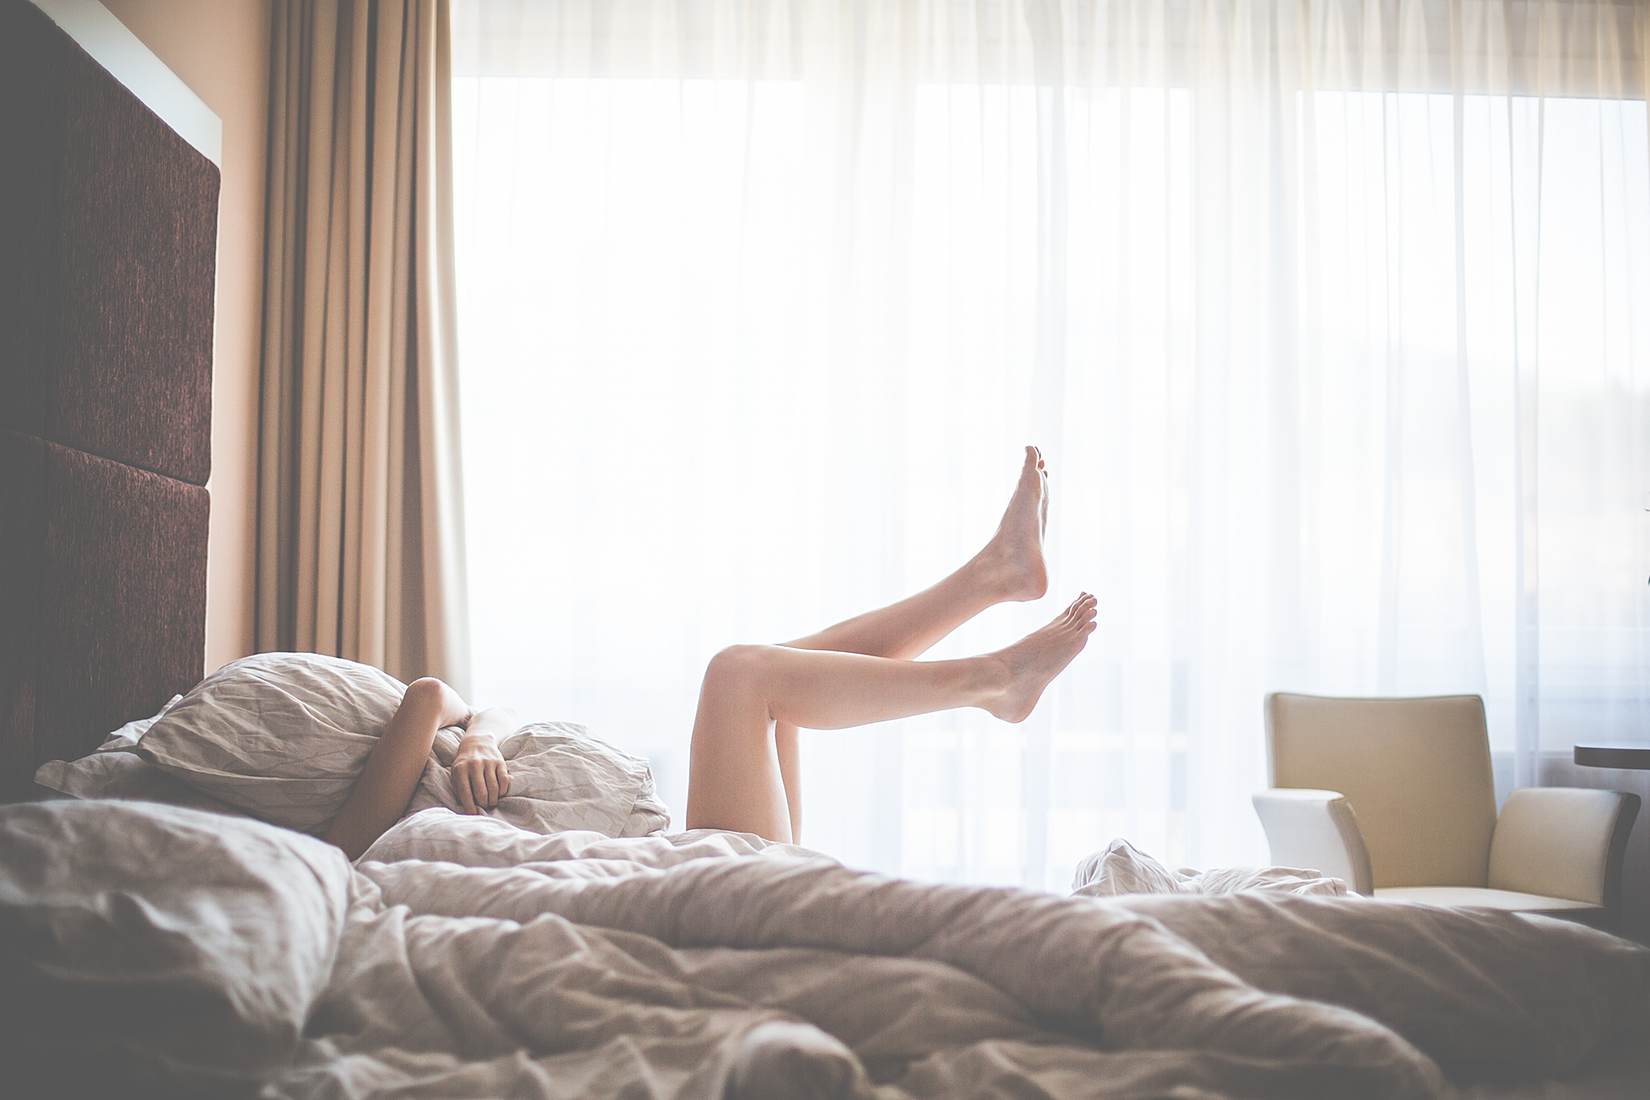 Don’t Get Tricked: 10 Signs You’re Being Lured Into Bed